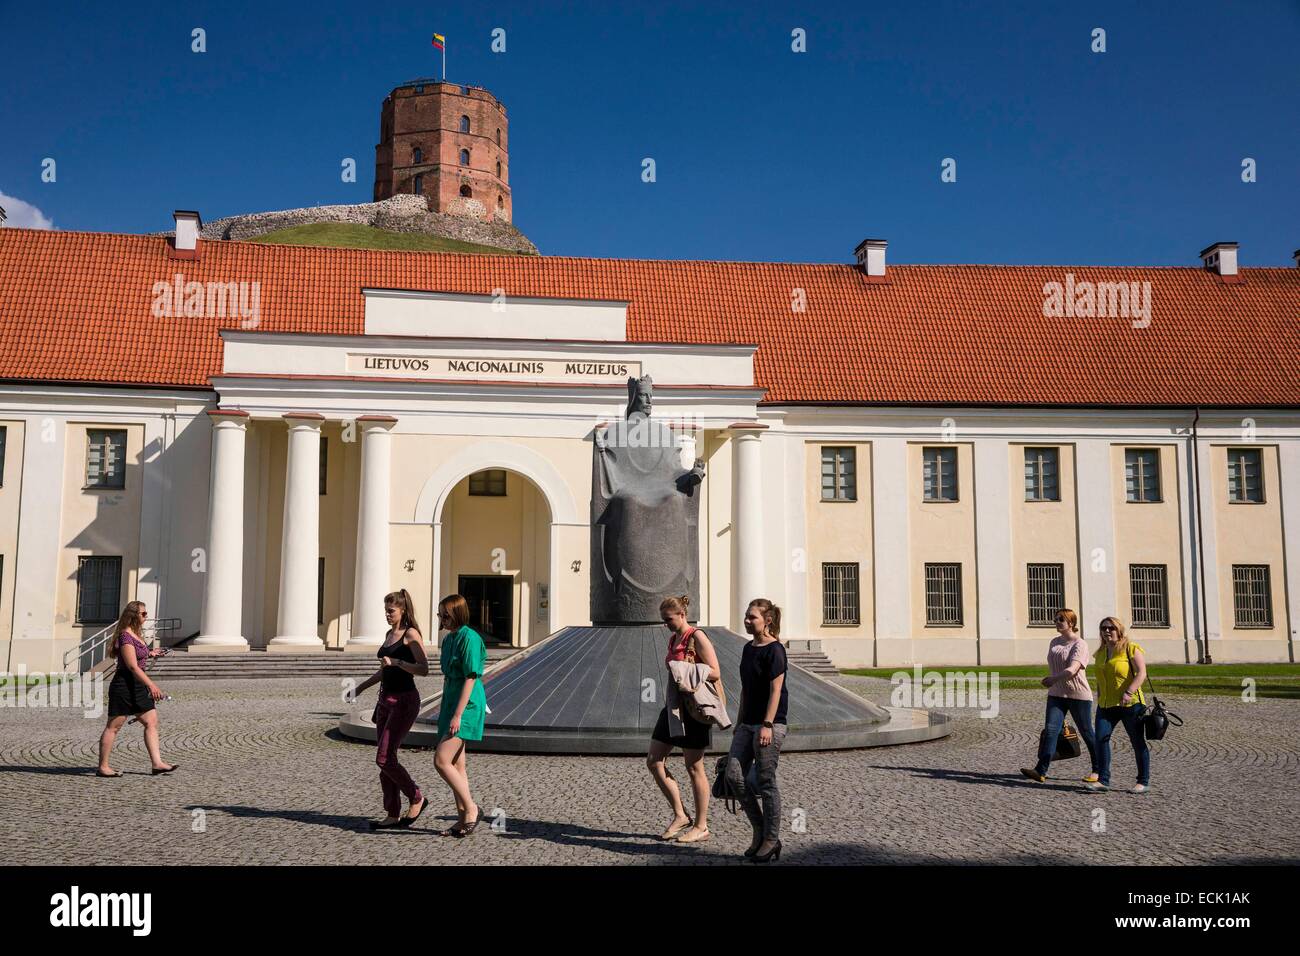 Lithuania (Baltic States), Vilnius, the New Arsenal, historical and ethnographic exhibition in the National Museum, Mindaugas statue, the first King of Lithuania in the 13th century, view of the Gediminas' Tower of the Upper Castle Stock Photo